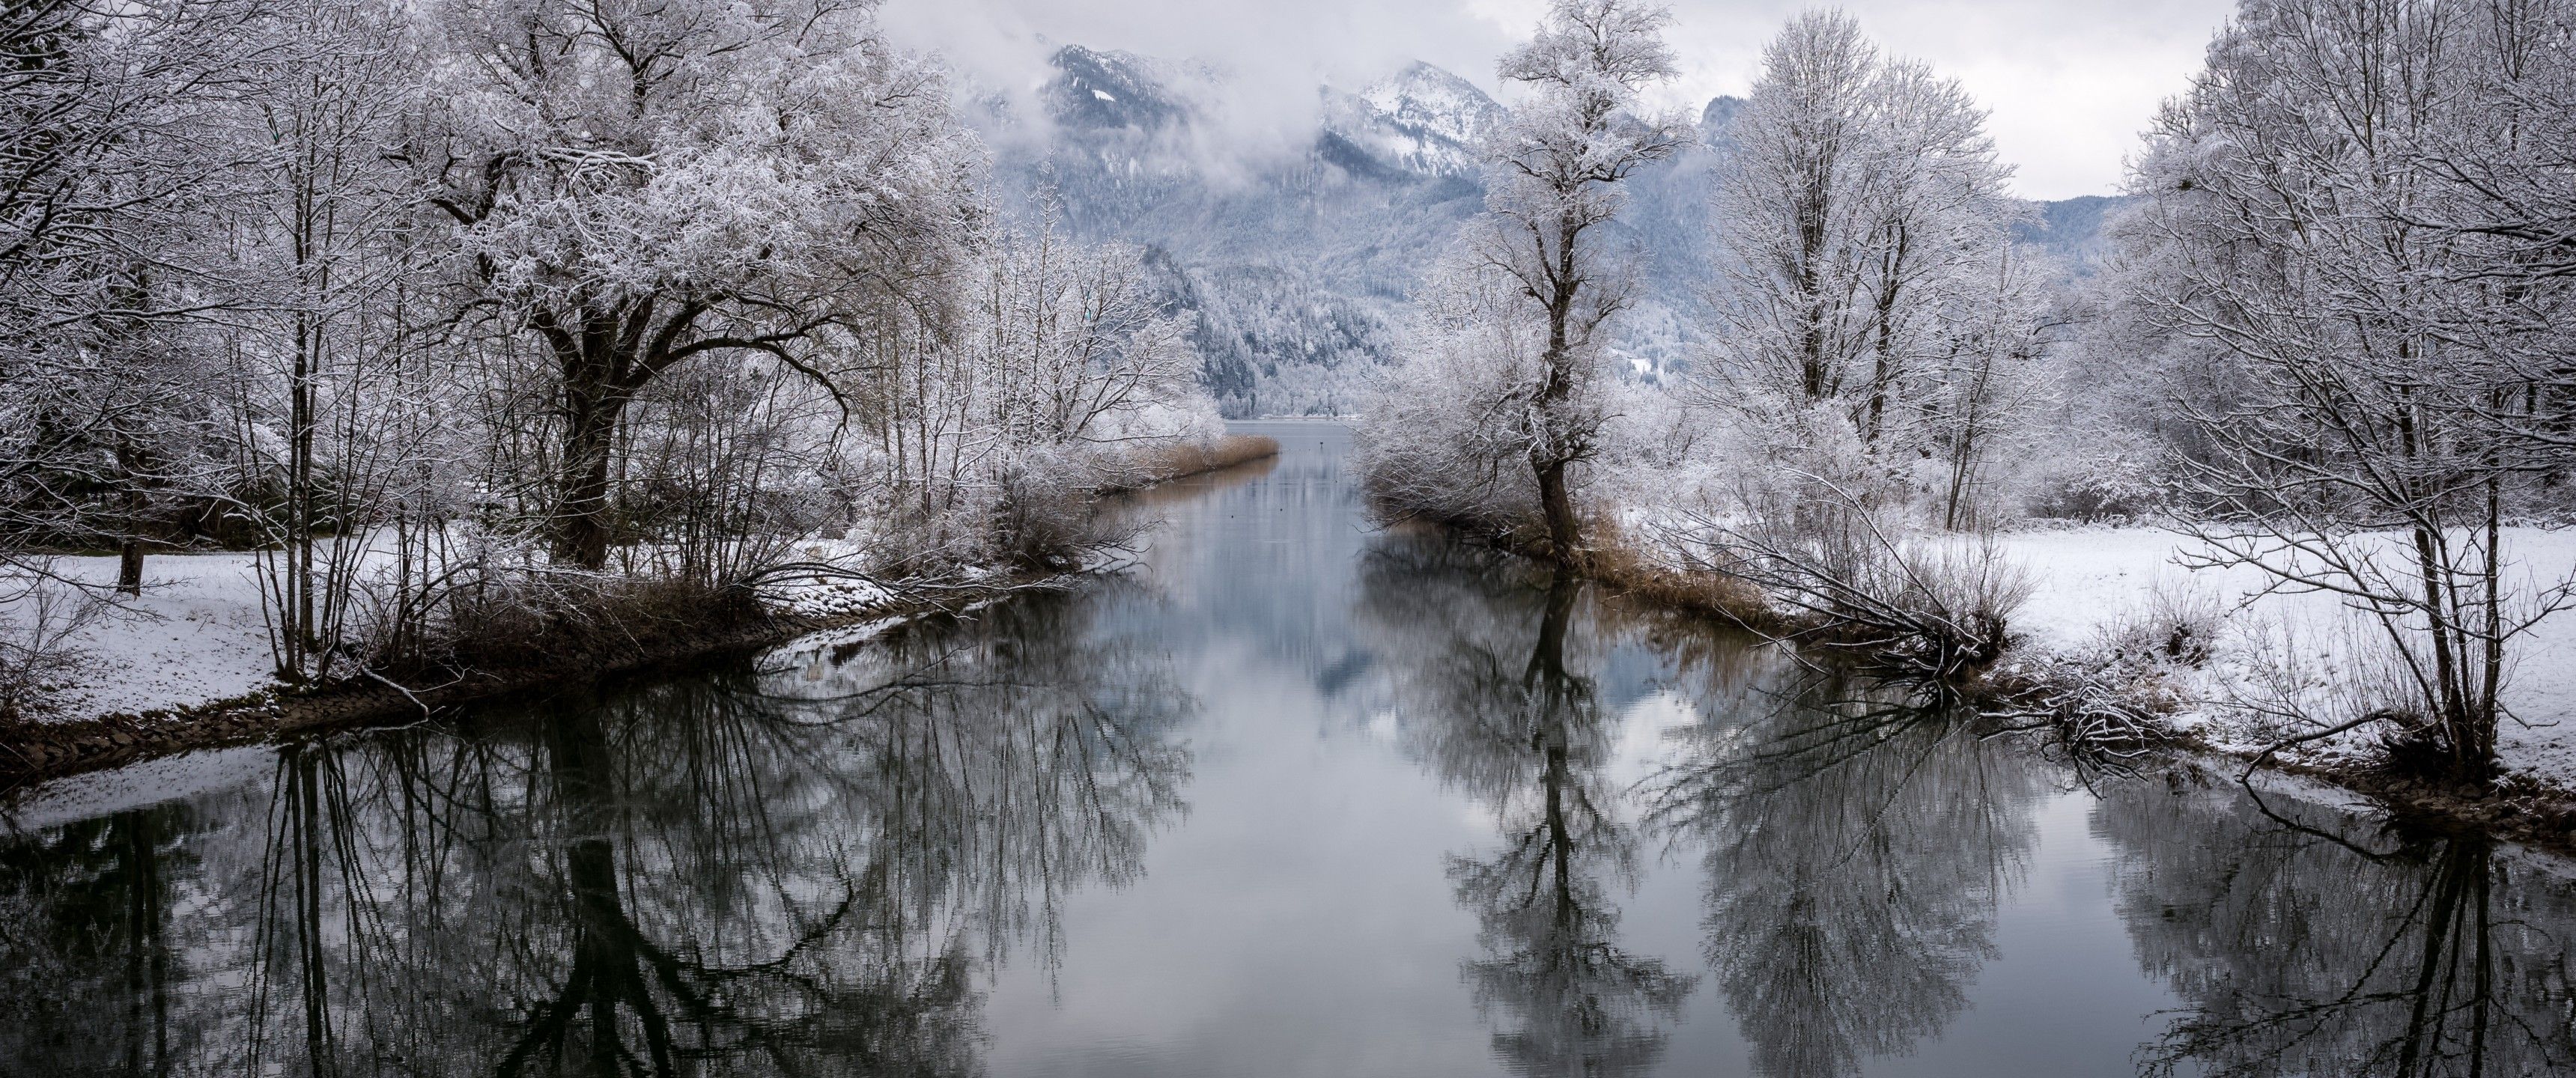 Download 3440x1440 River, Reflection, Snow, Trees, Winter, Mountain Wallpaper